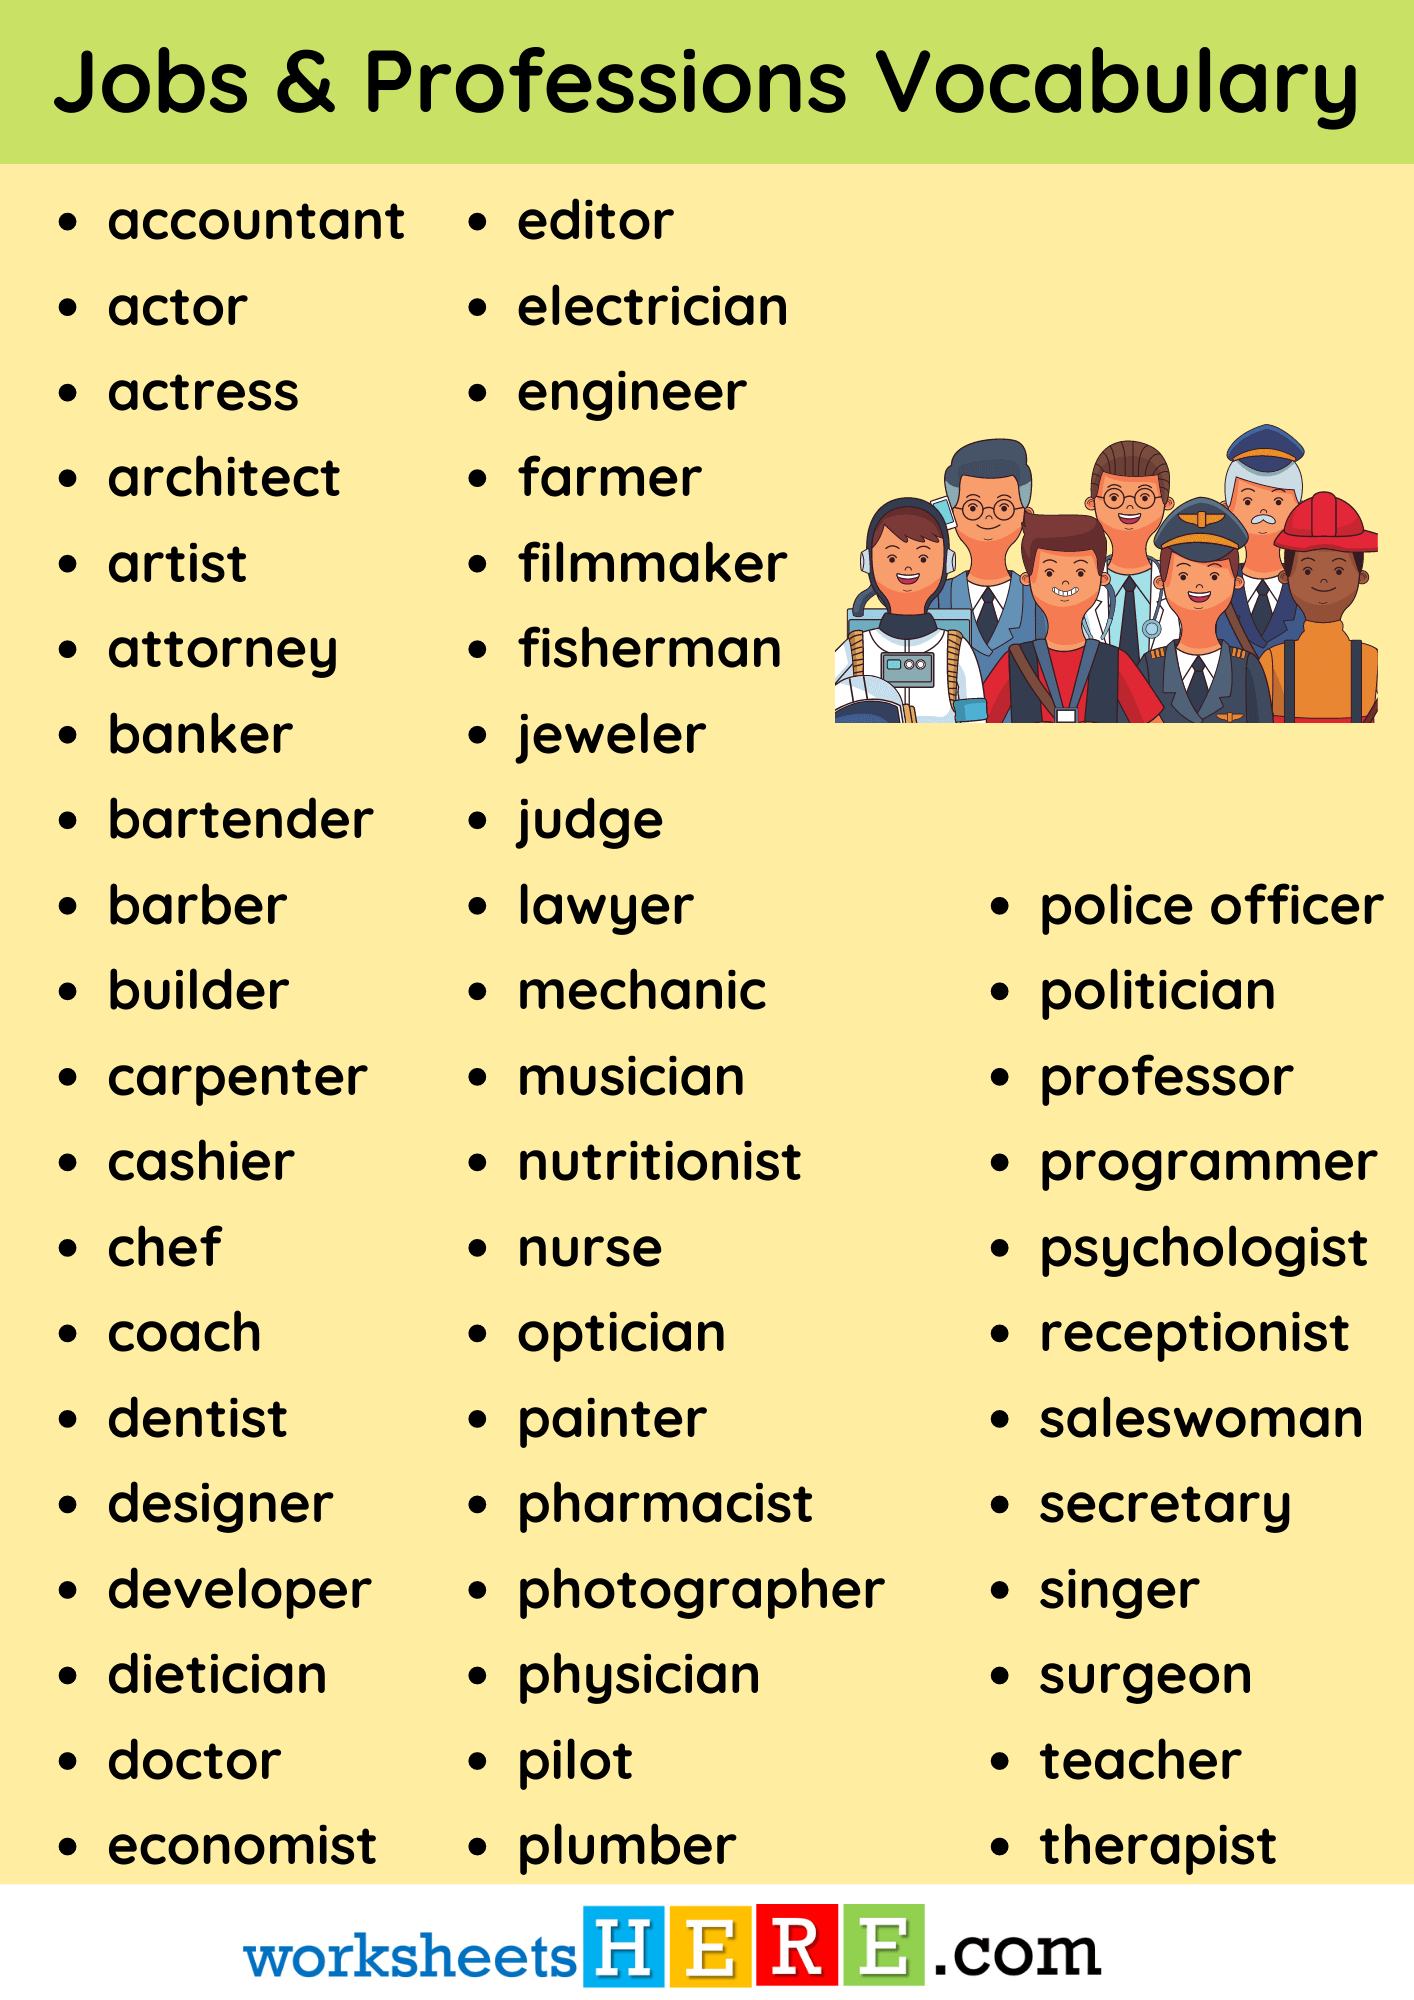 Jobs and Professions Vocabulary List PDF Worksheet For Students and Kids